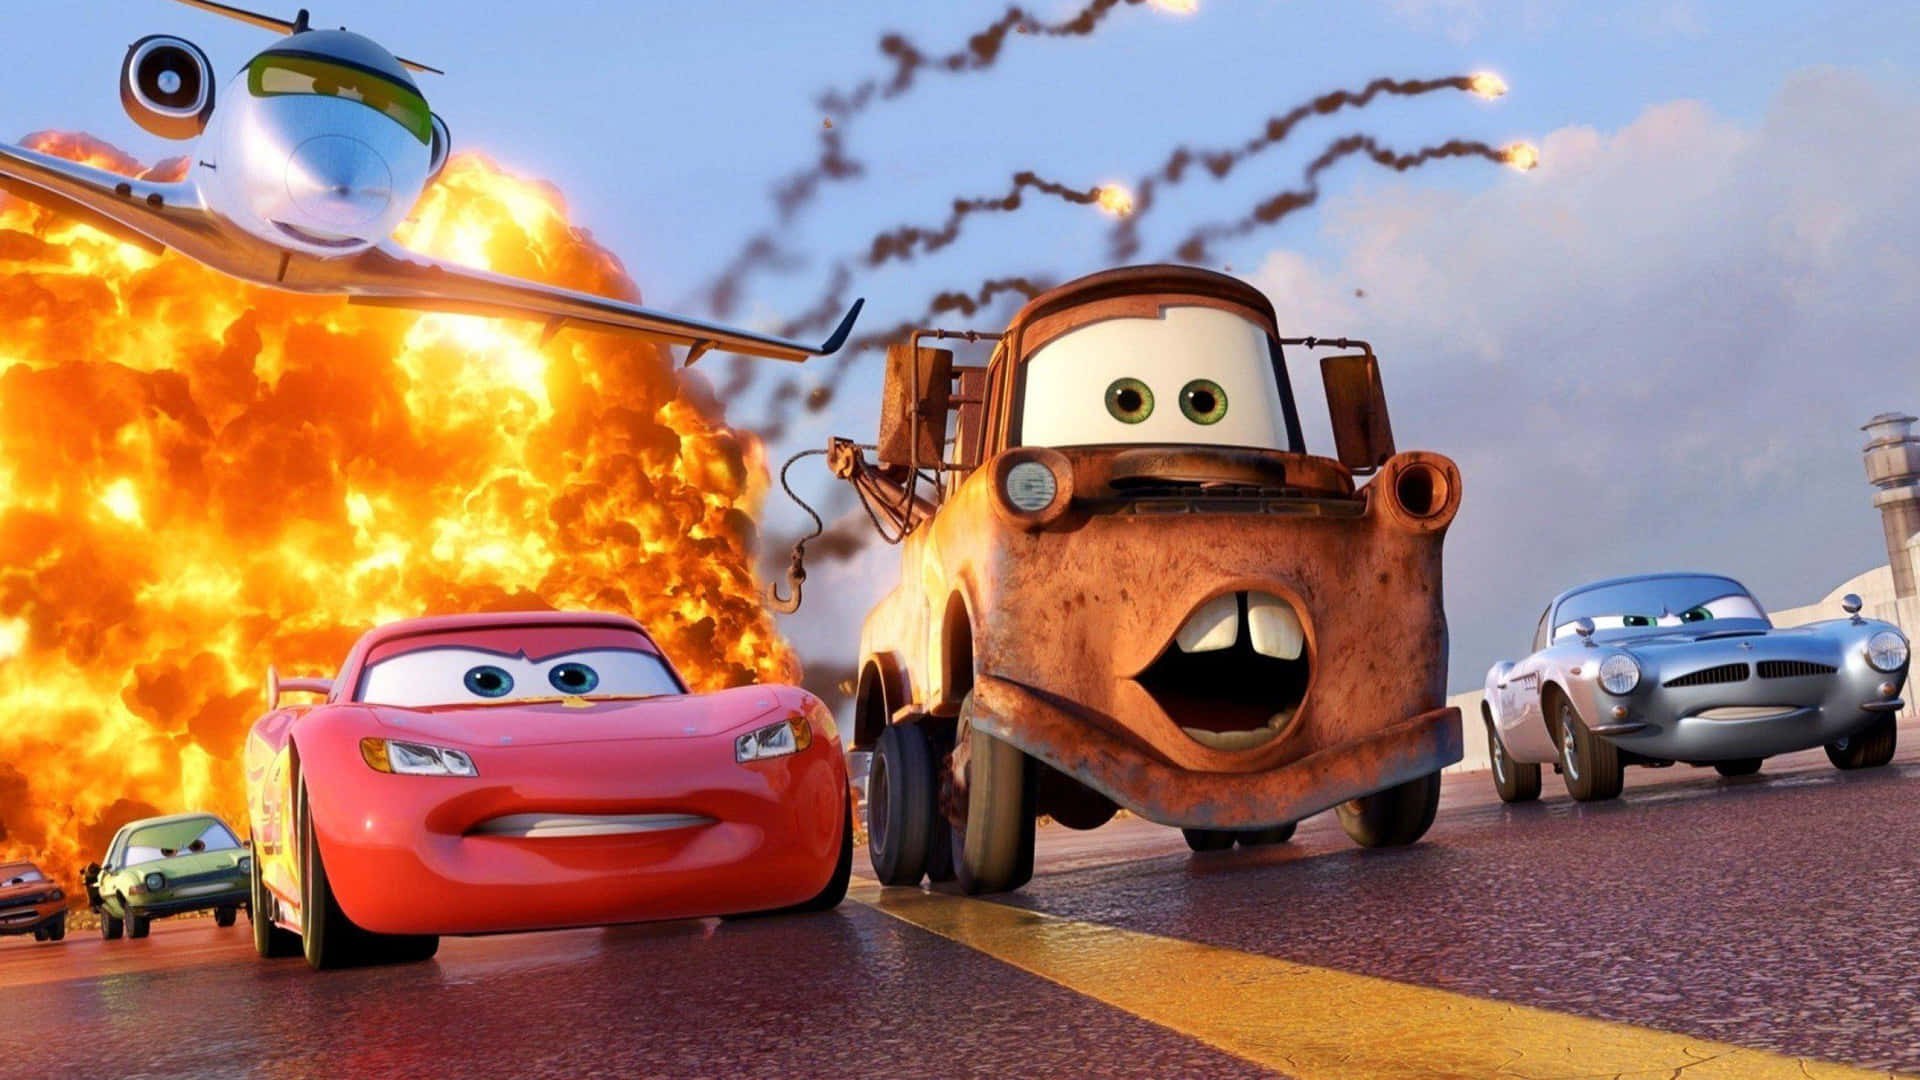 Cars In The Movie With A Plane And Explosion